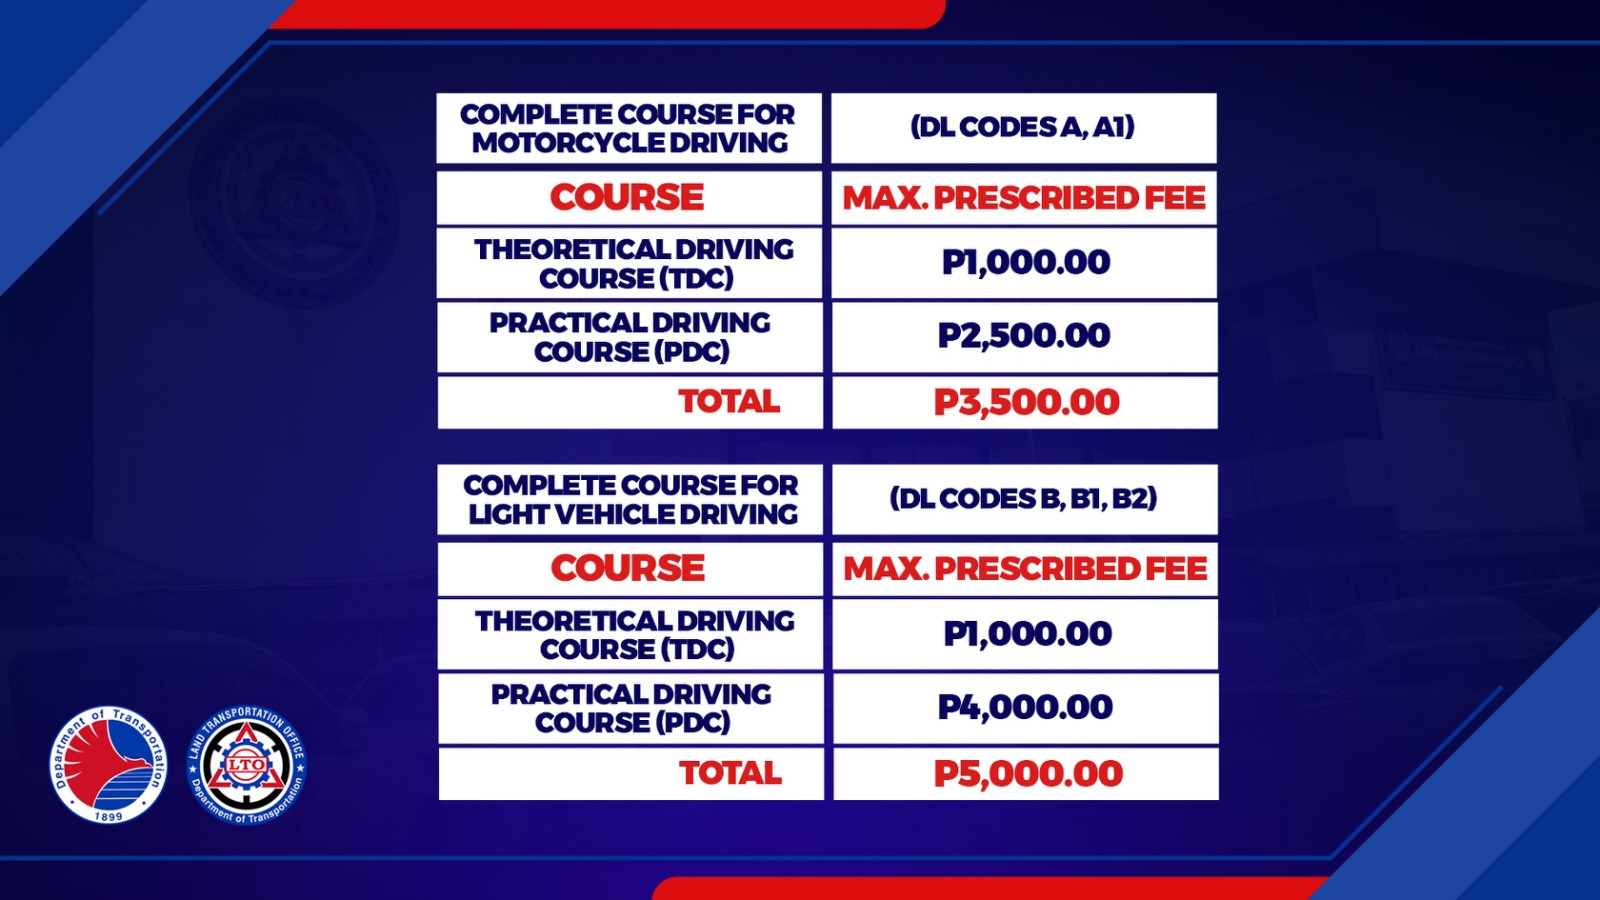 LTO to impose cap on driving schools' rates starting April 15 